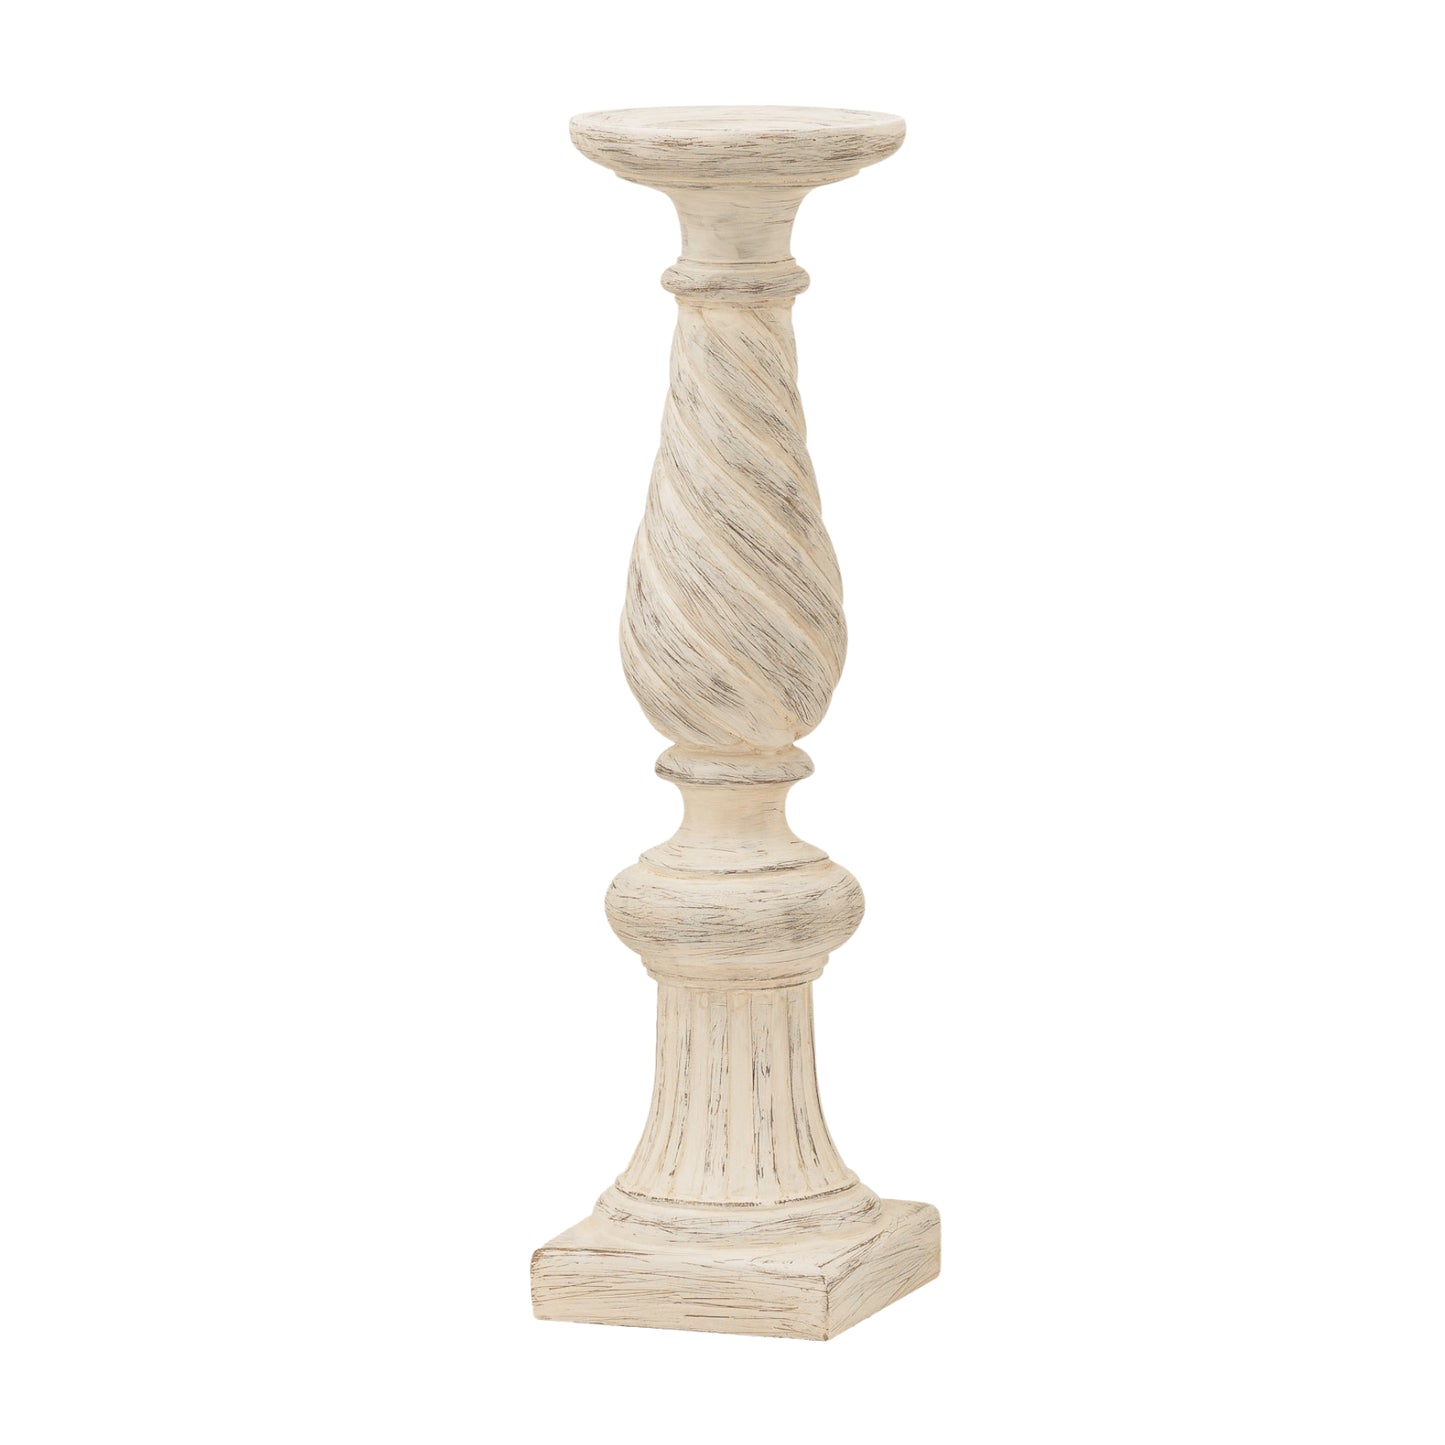 Antique Ivory Twisted Candle Column